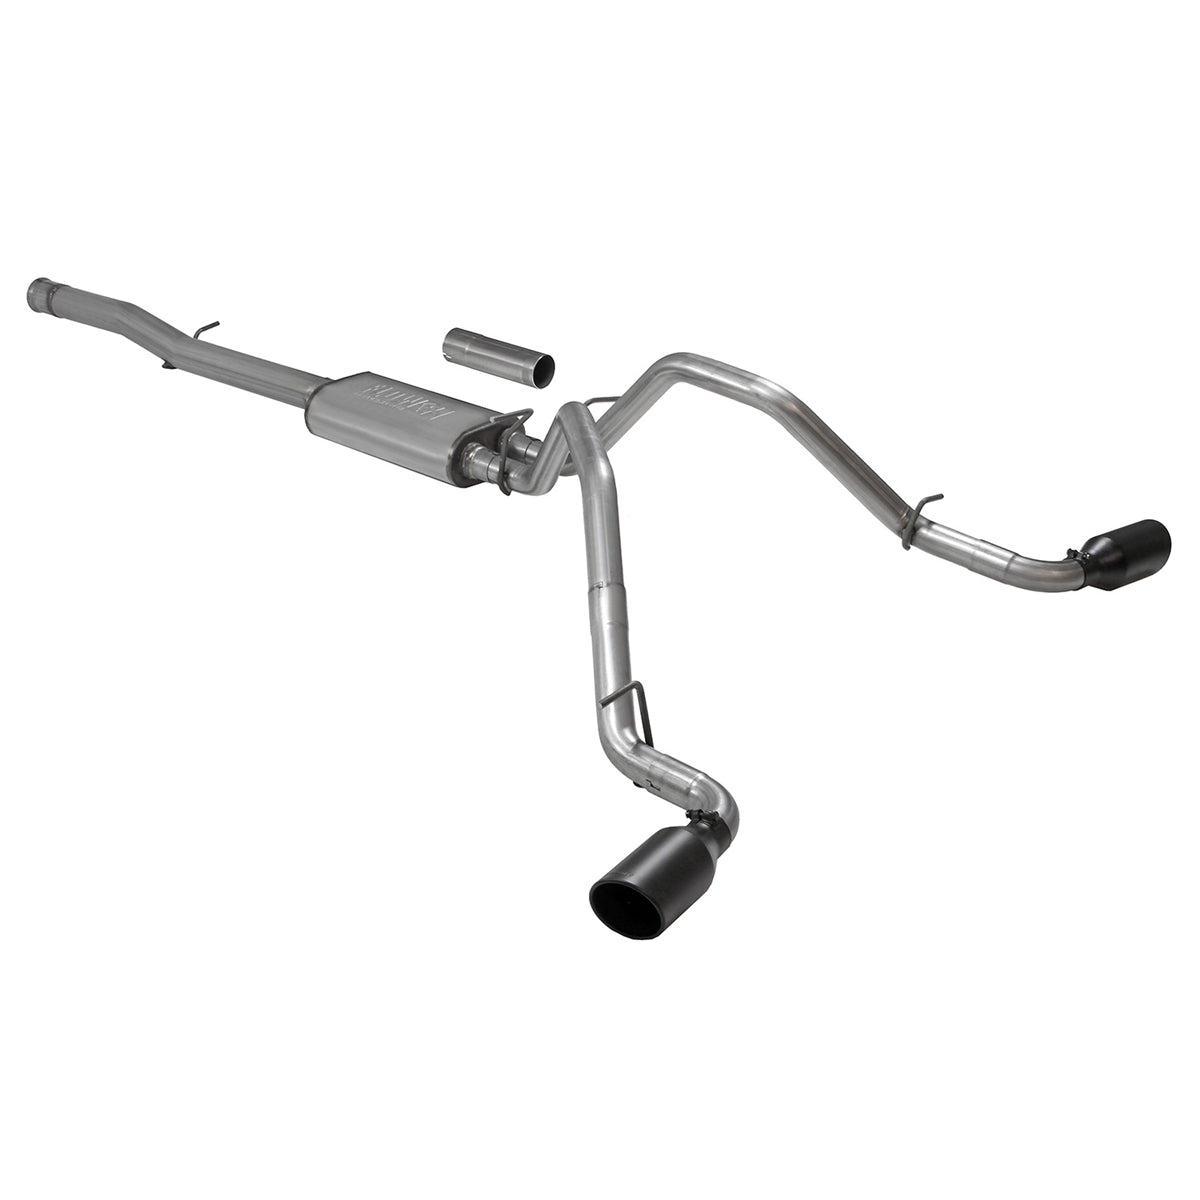 Flowmaster FlowFX Cat-Back Exhaust System fits 2011-18 GM 1500